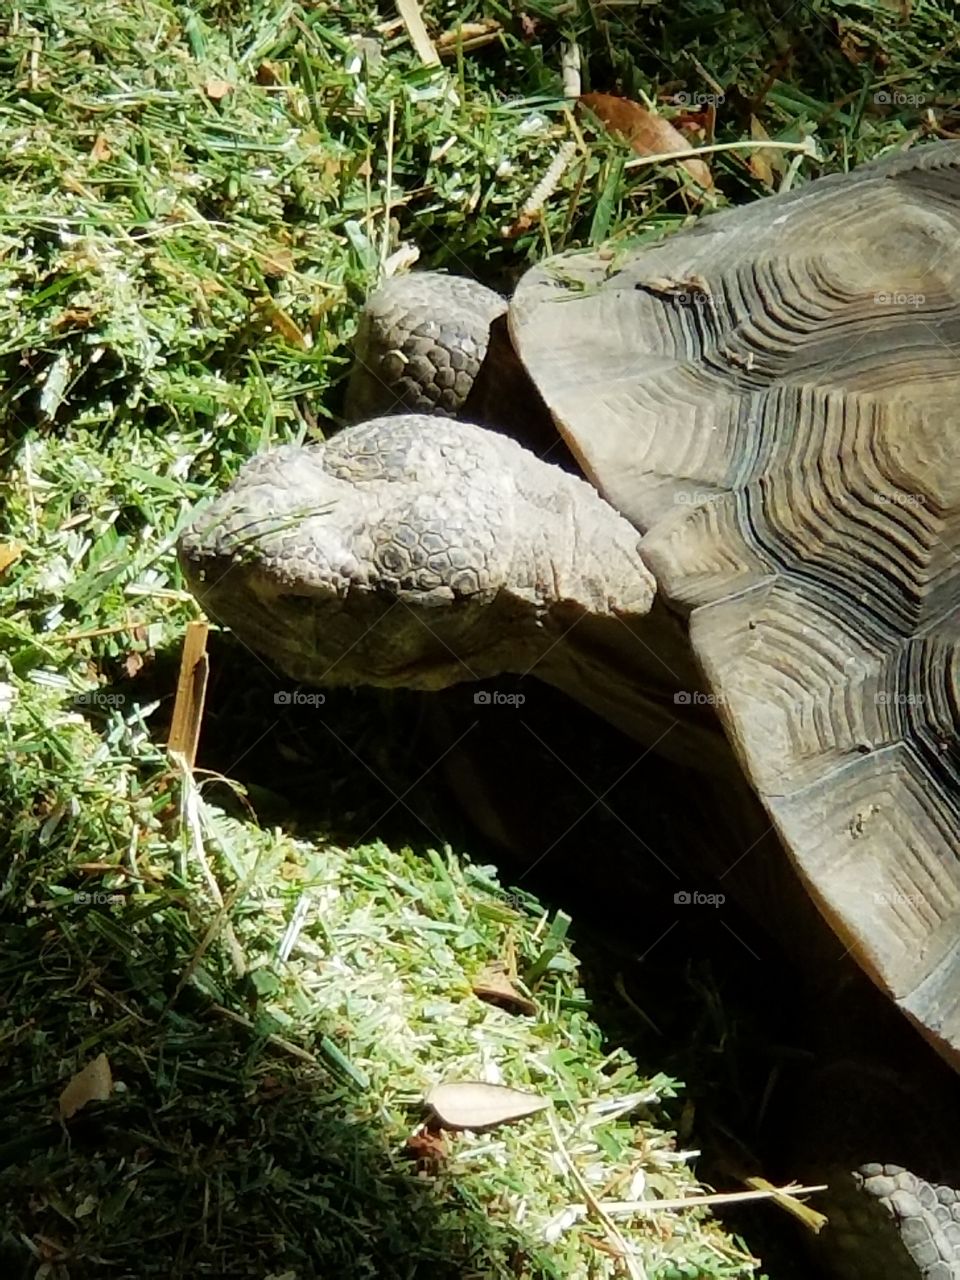 A Desert Tortoise Eating Grass, It's A Good Day To Be A Pet Tortoise